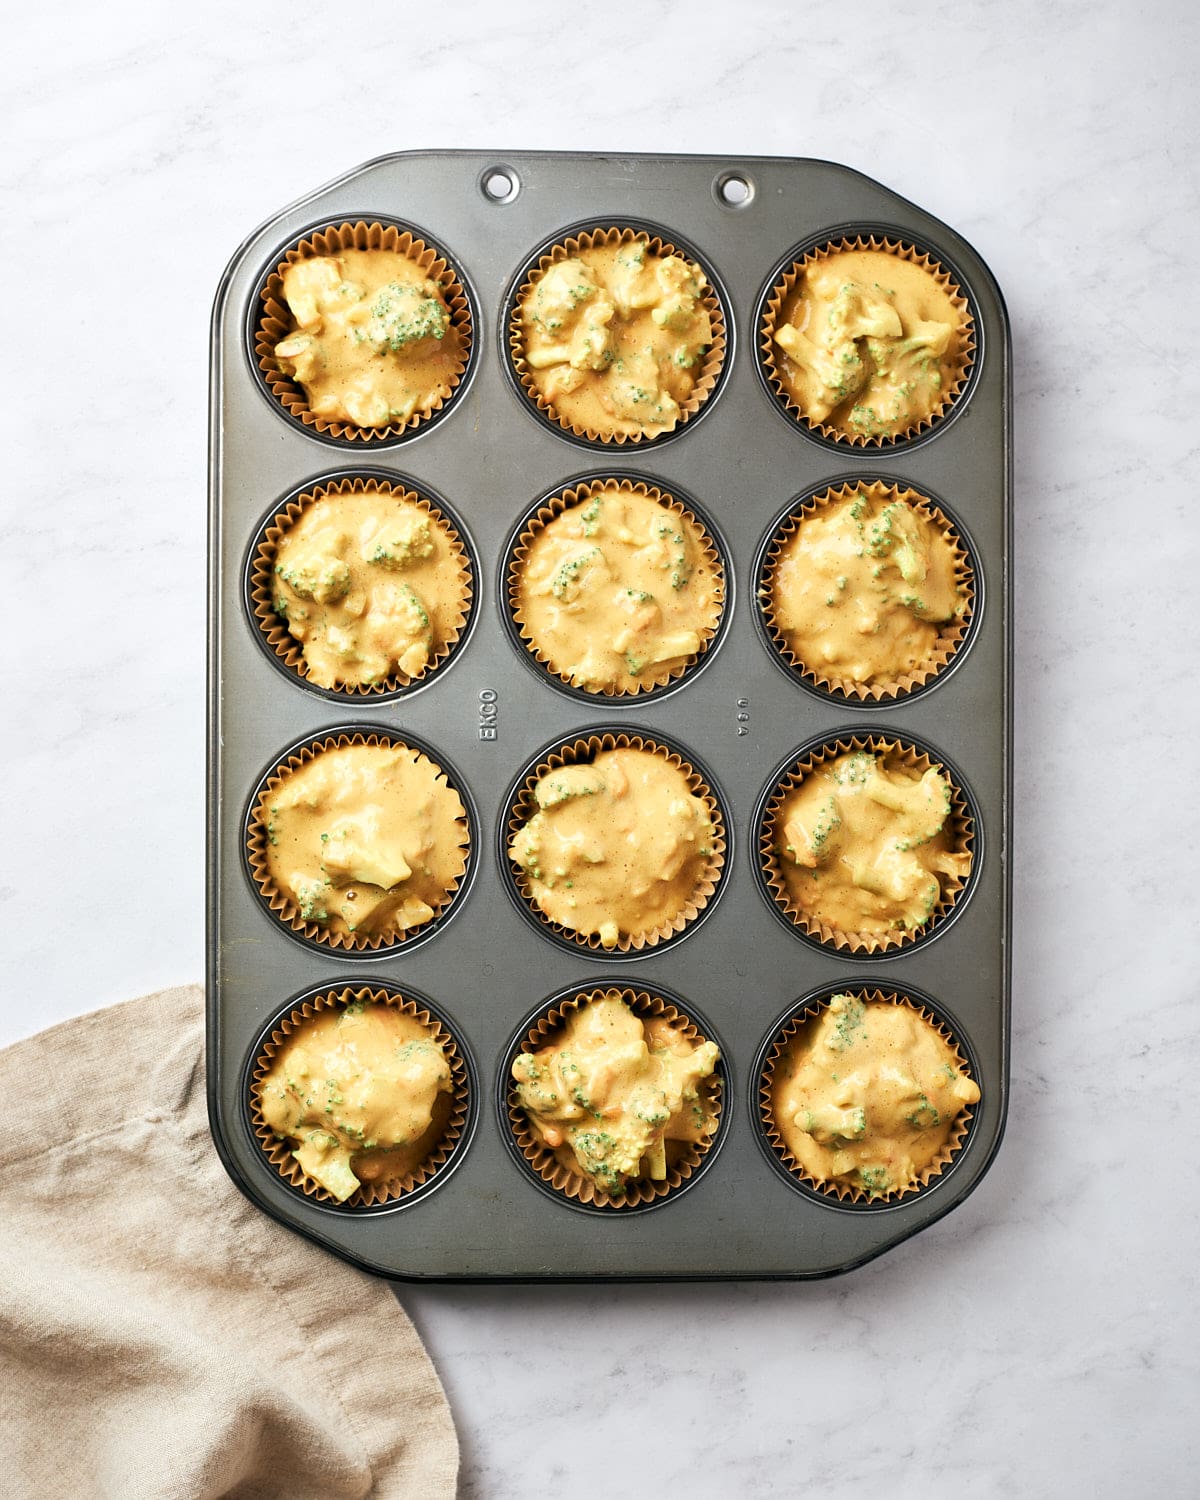 Top down view of broccoli cheddar egg cups batter in muffin tin